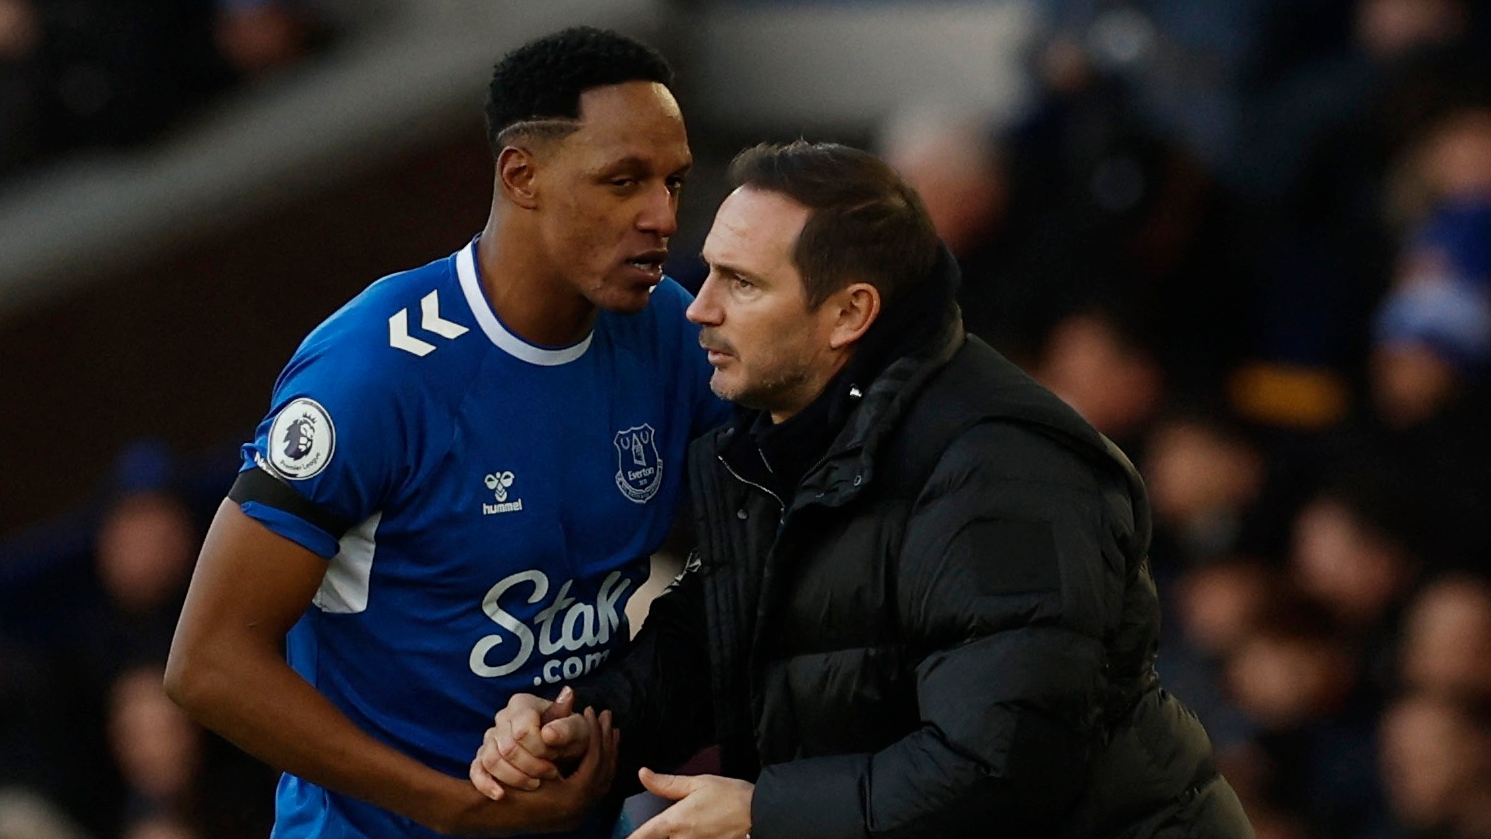 Soccer Football - Premier League - Everton v Wolverhampton Wanderers - Goodison Park, Liverpool, Britain - December 26, 2022 Everton's Yerry Mina celebrates scoring their first goal with manager Frank Lampard Action Images via Reuters/Jason Cairnduff EDITORIAL USE ONLY. No use with unauthorized audio, video, data, fixture lists, club/league logos or 'live' services. Online in-match use limited to 75 images, no video emulation. No use in betting, games or single club /league/player publications.  Please contact your account representative for further details.